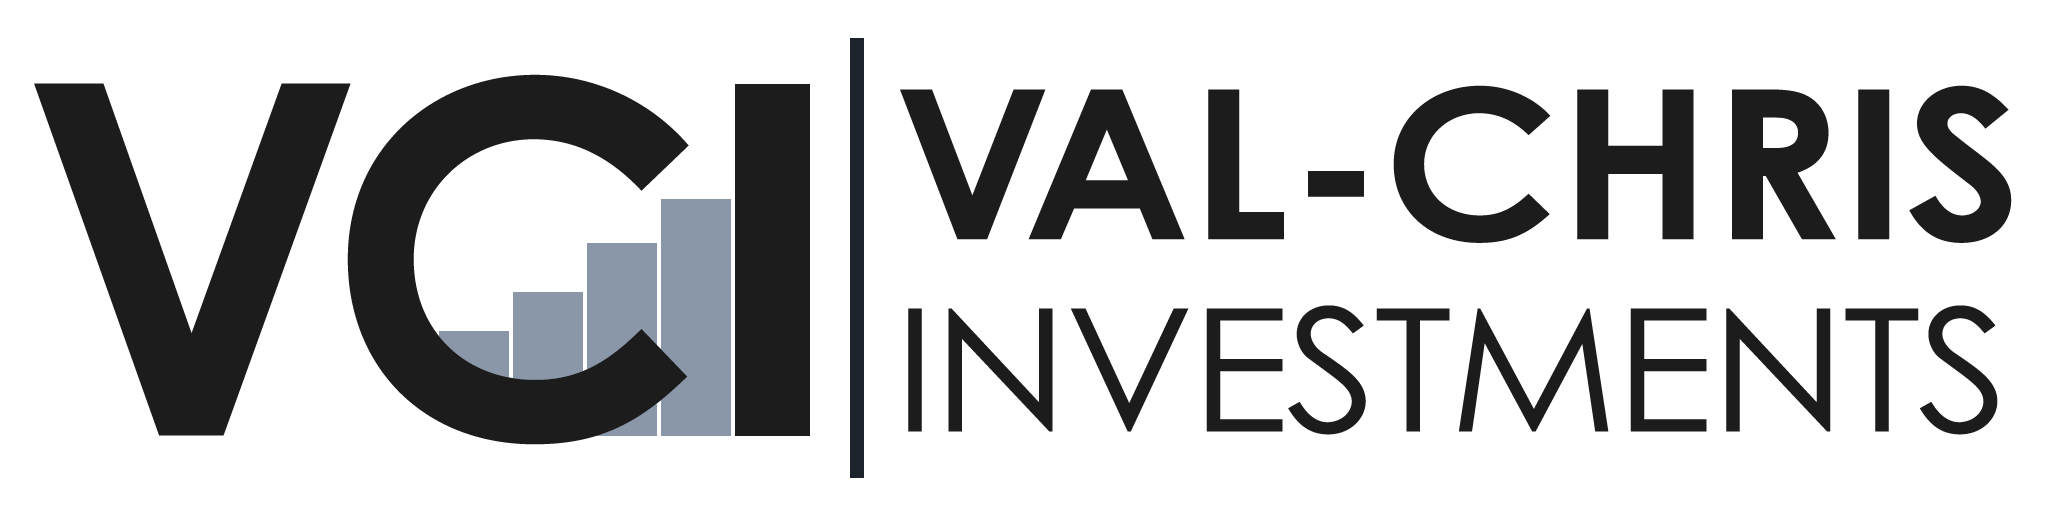 VCI | Val-Chris Investments